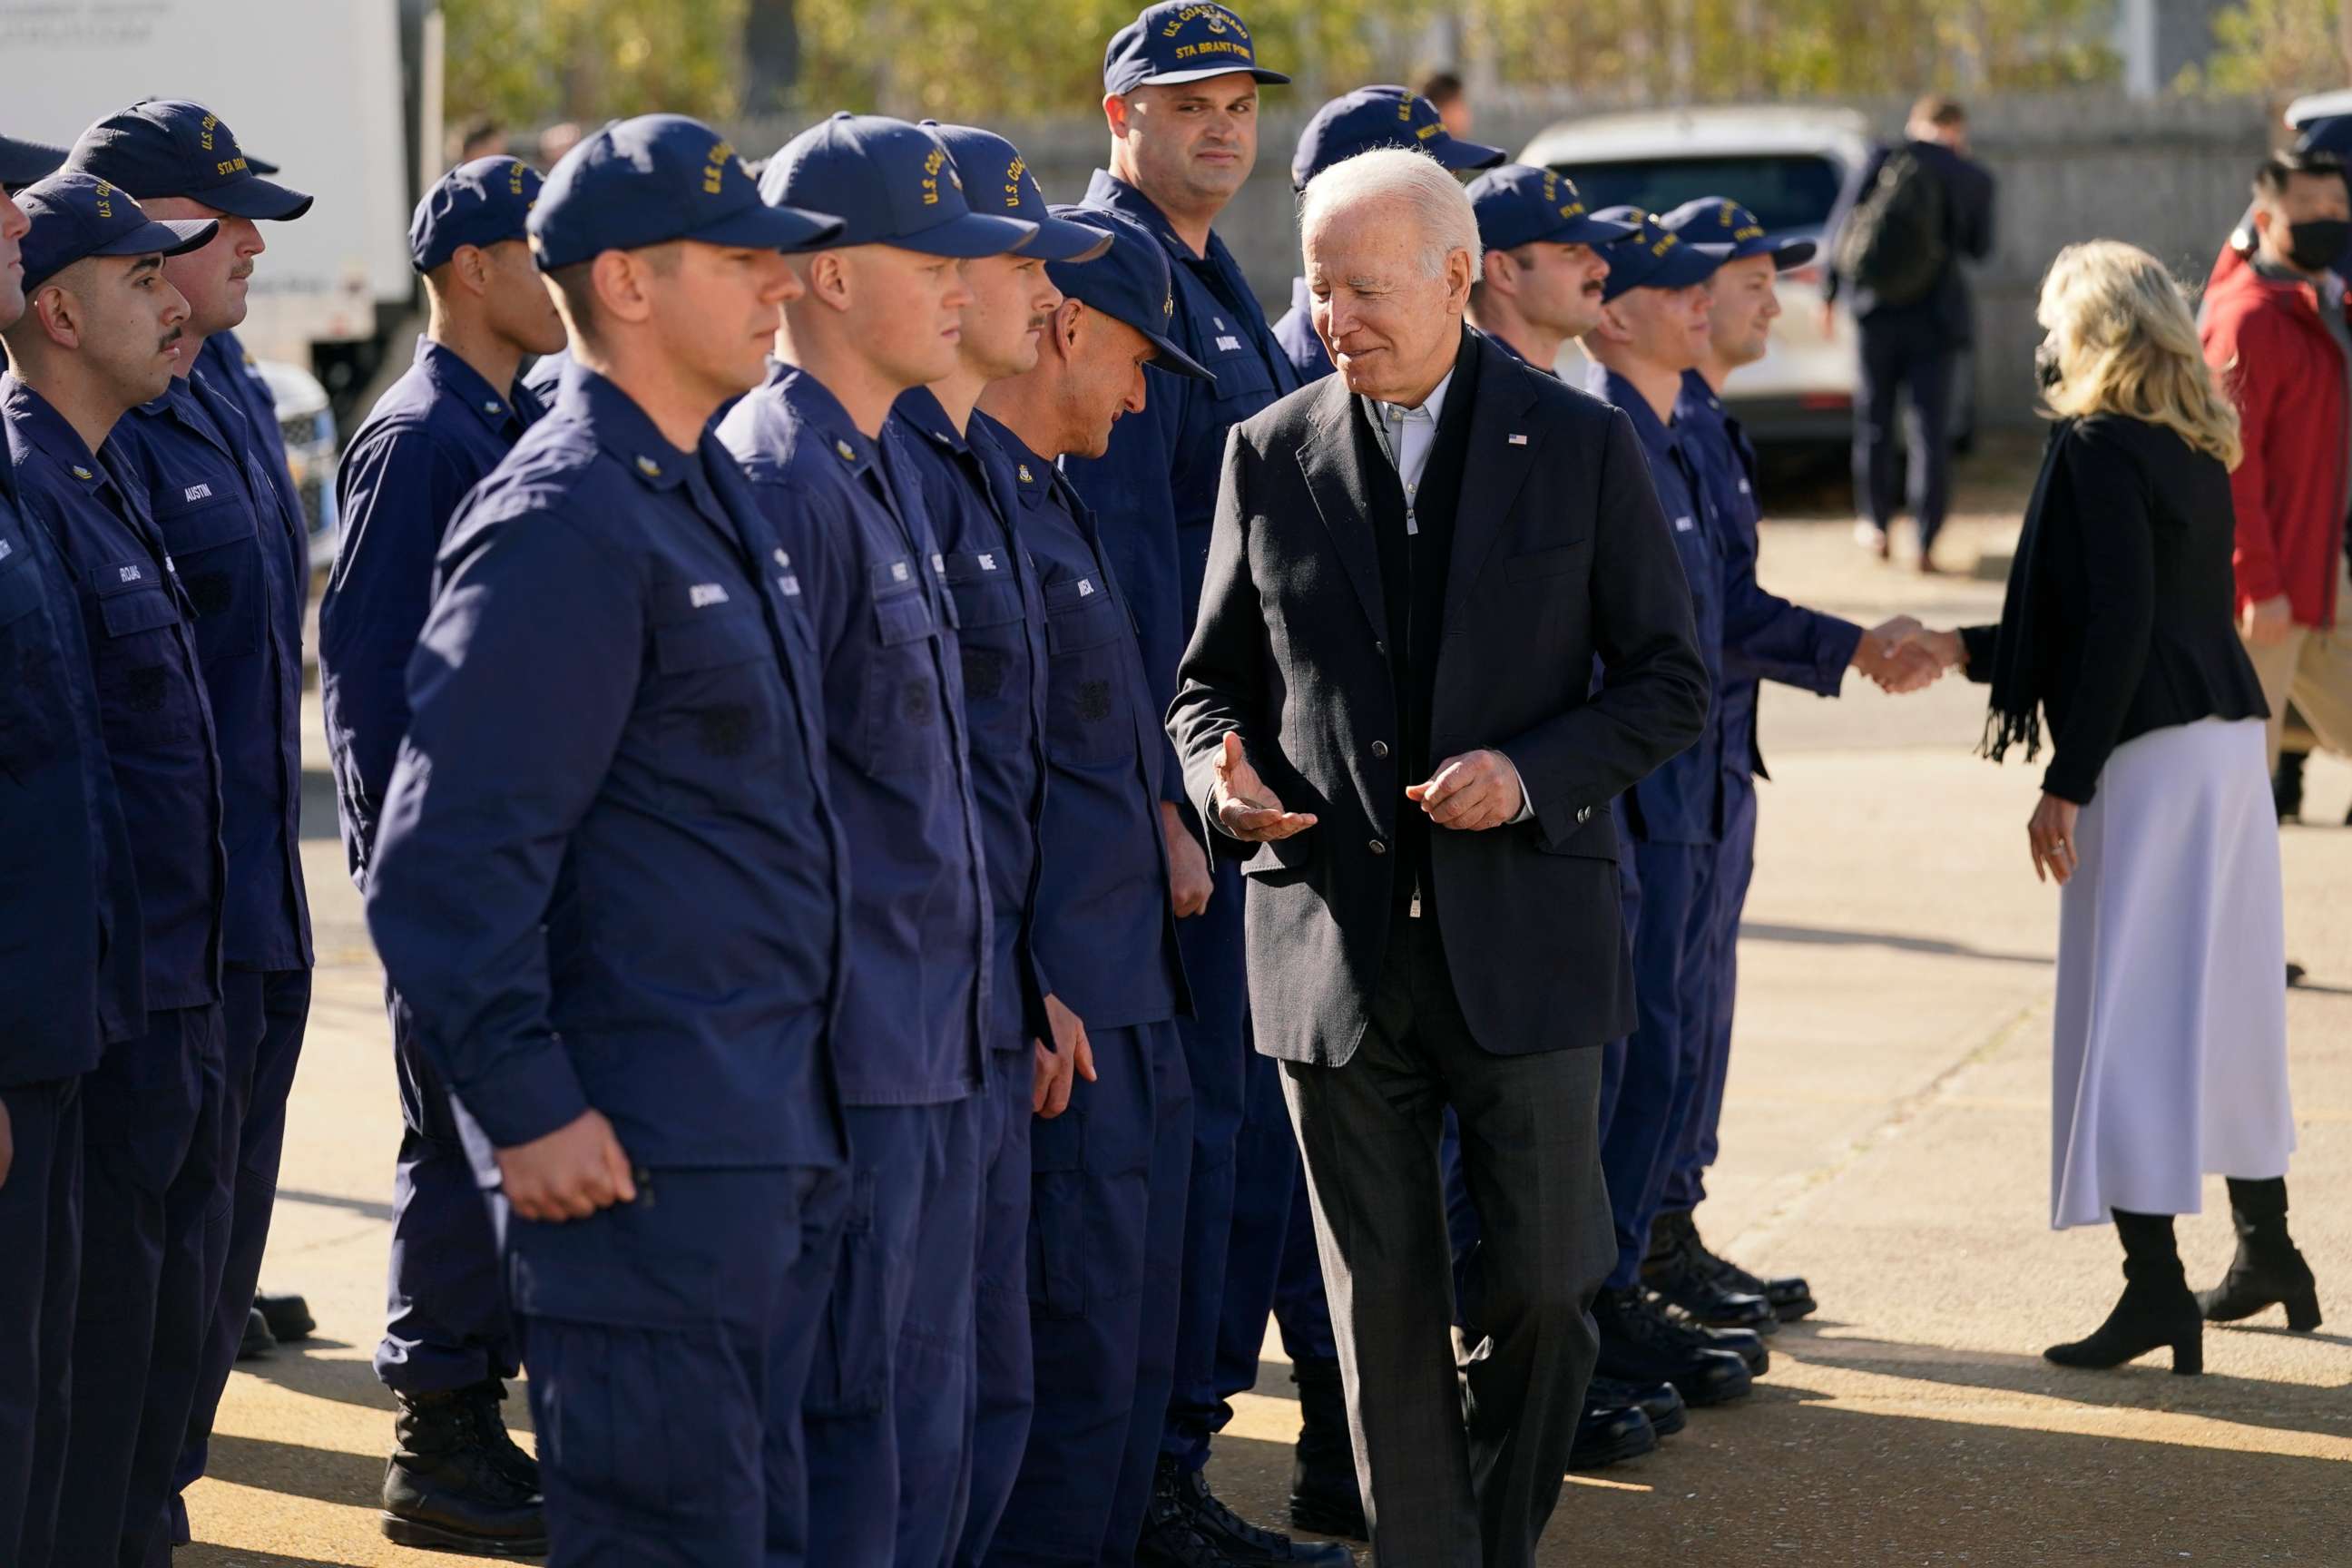 PHOTO: President Joe Biden hands out challenge coins as he and first lady Jill Biden meet with members of the Coast Guard at the United States Coast Guard Station Brant Point in Nantucket, Mass., Nov. 25, 2021.